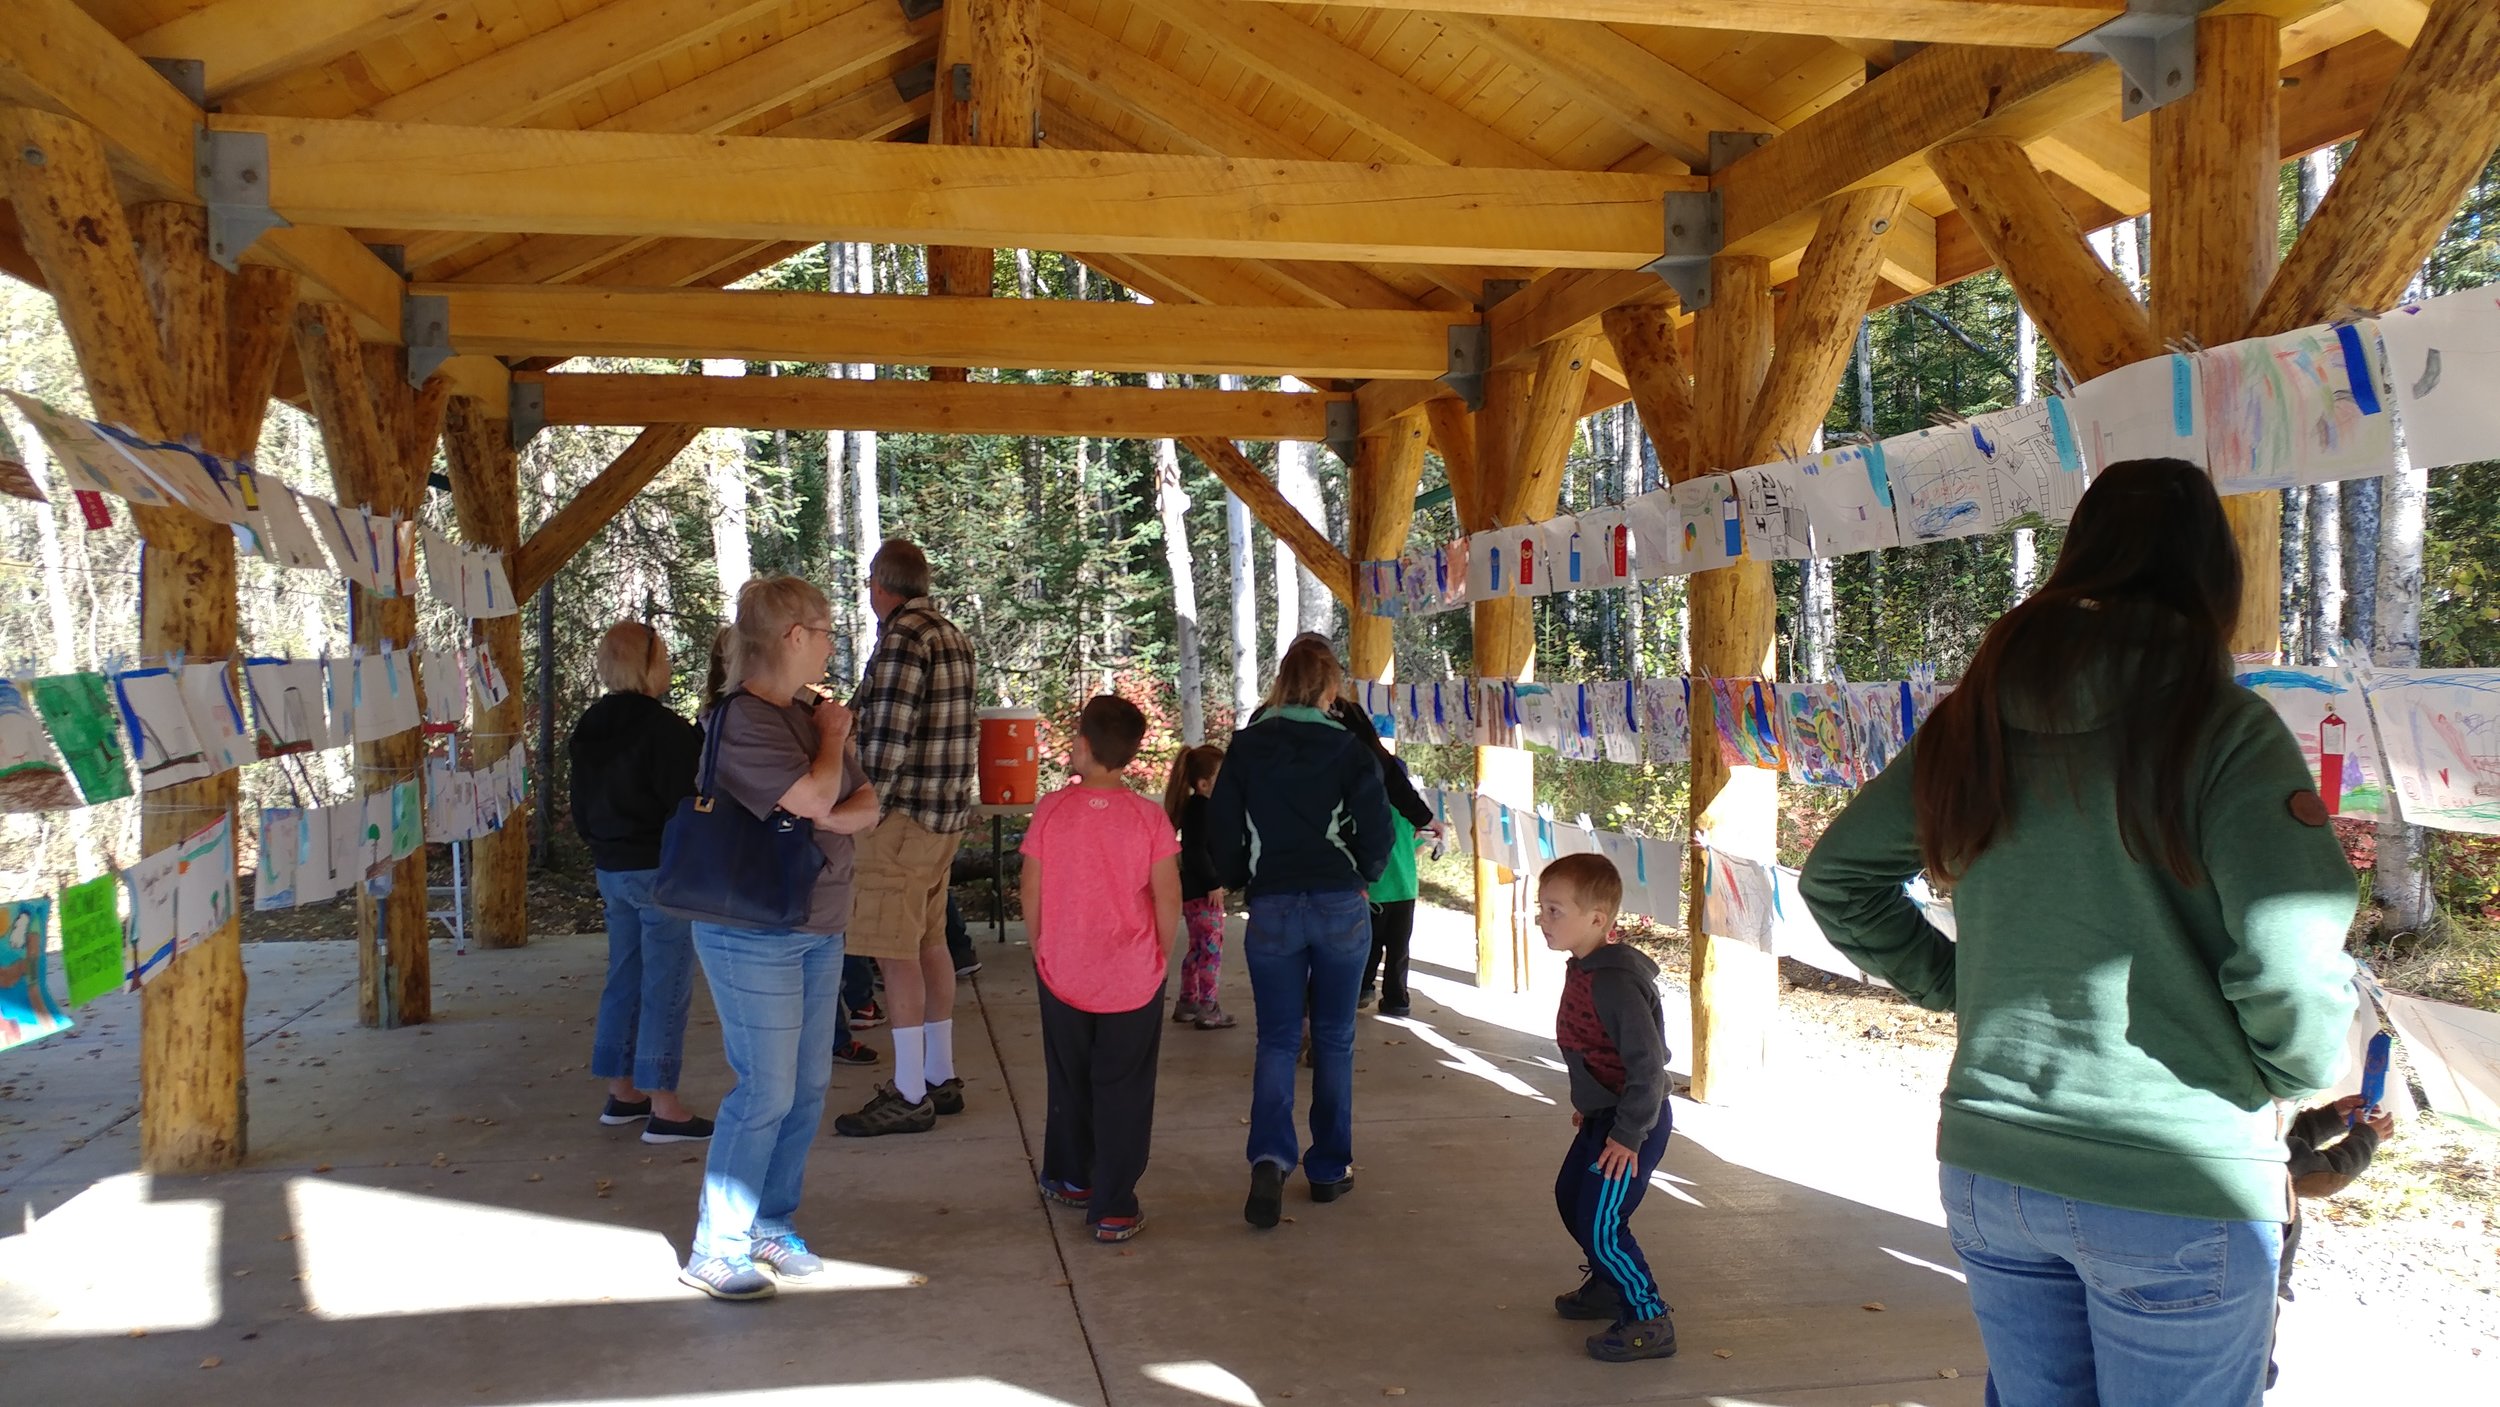 COMMUNITY - Fall Fun In The Park 4 (Art show in the pavilion.).jpg